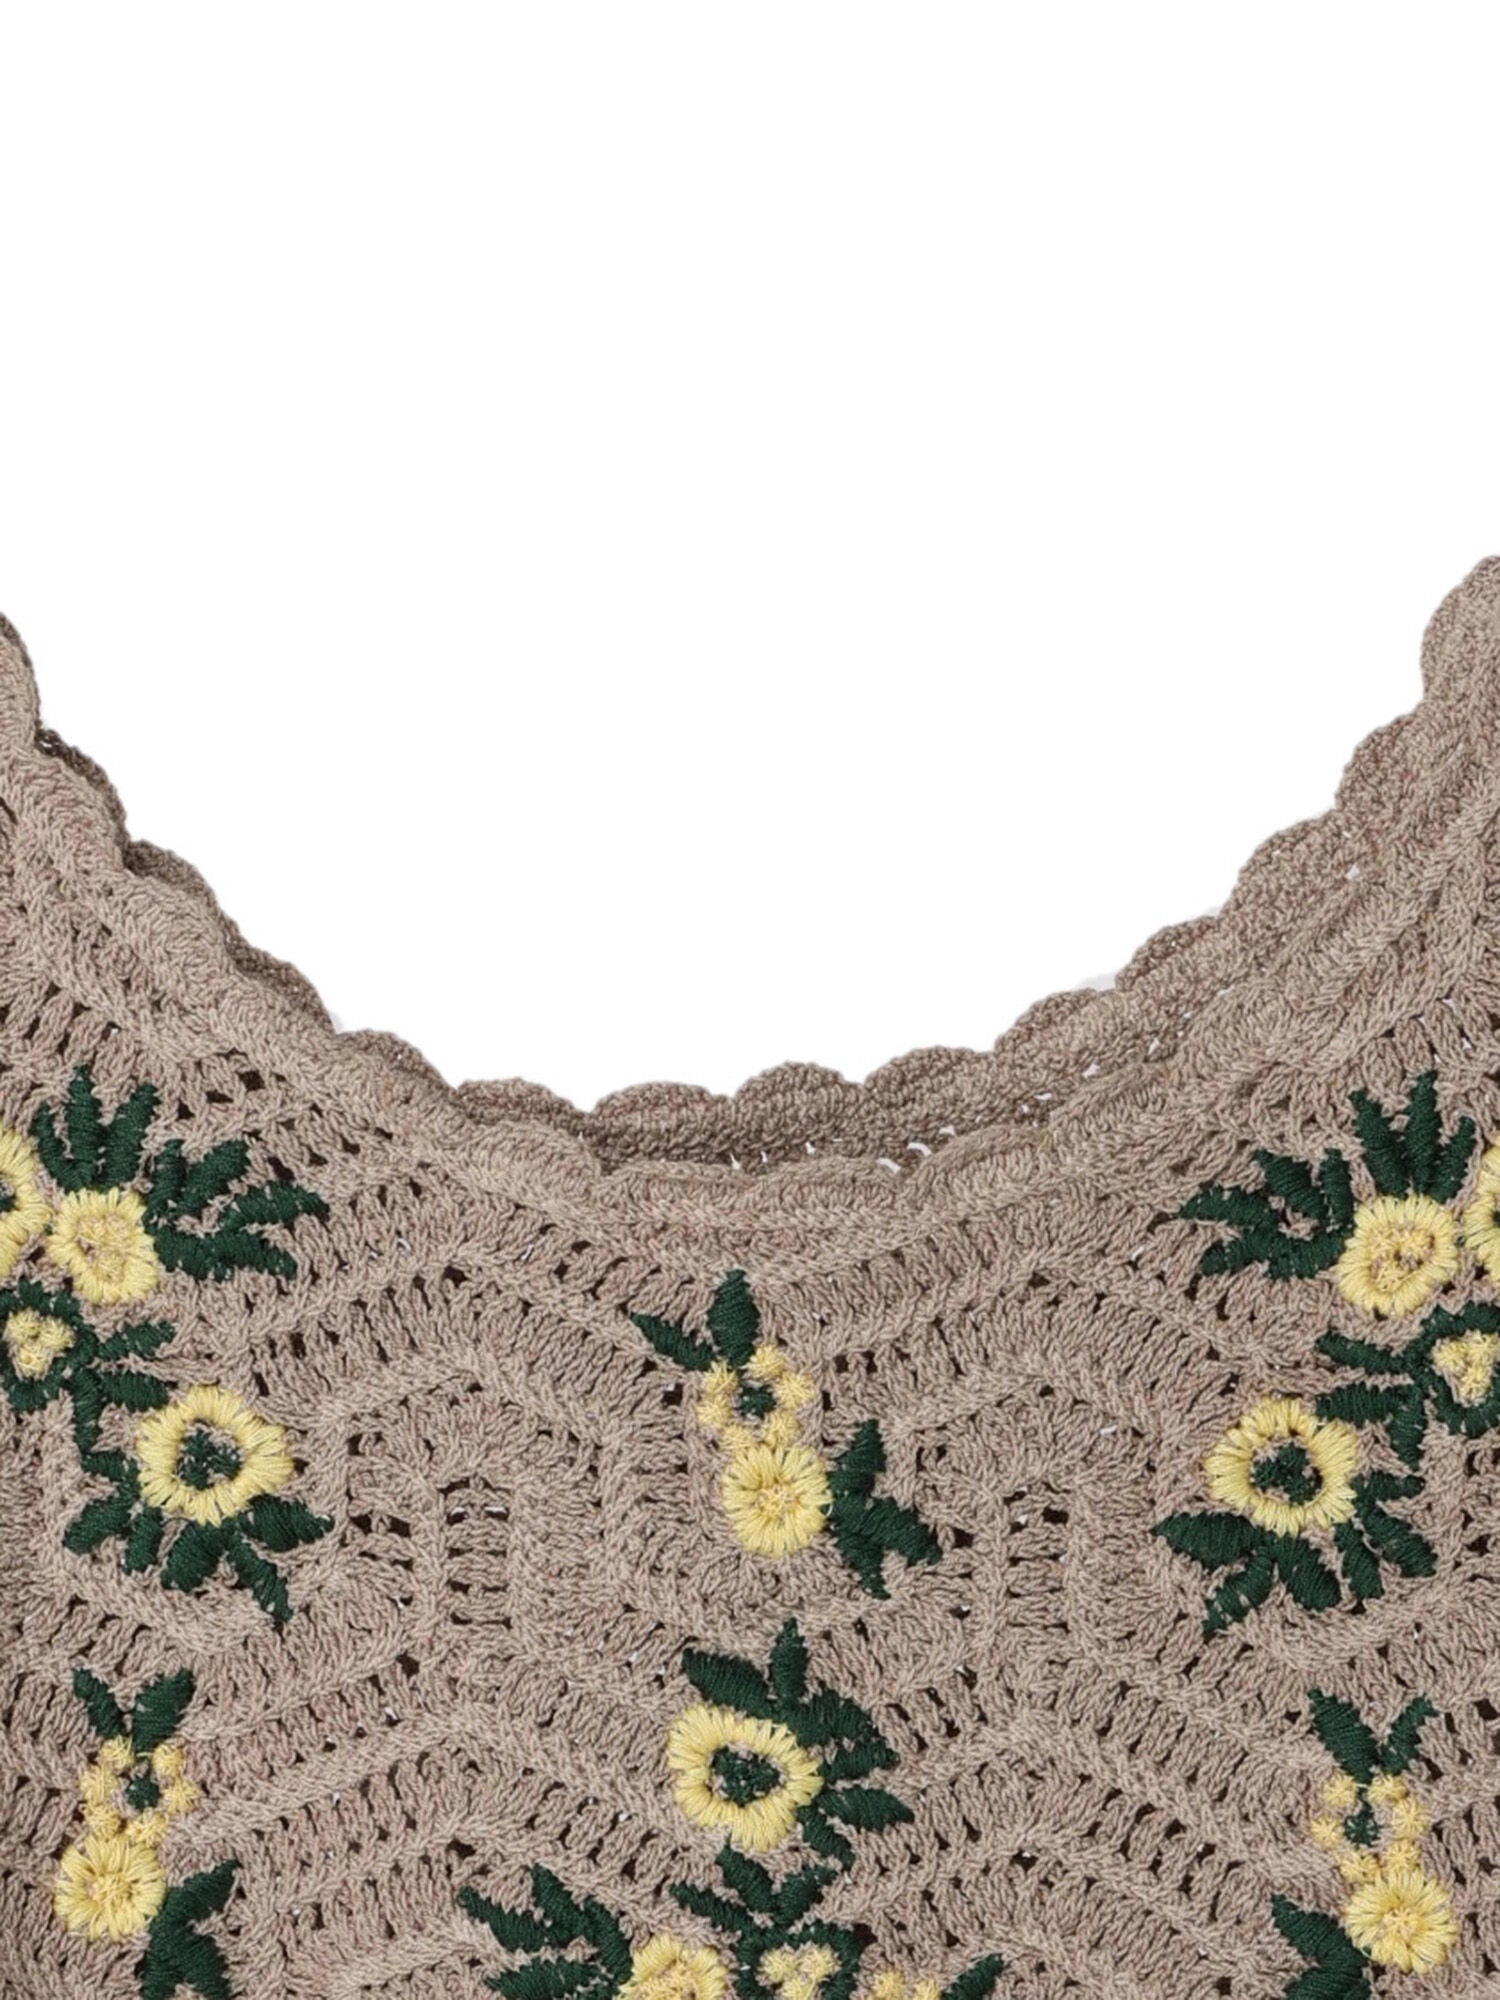 Chenna Flower Embroidery Bustier